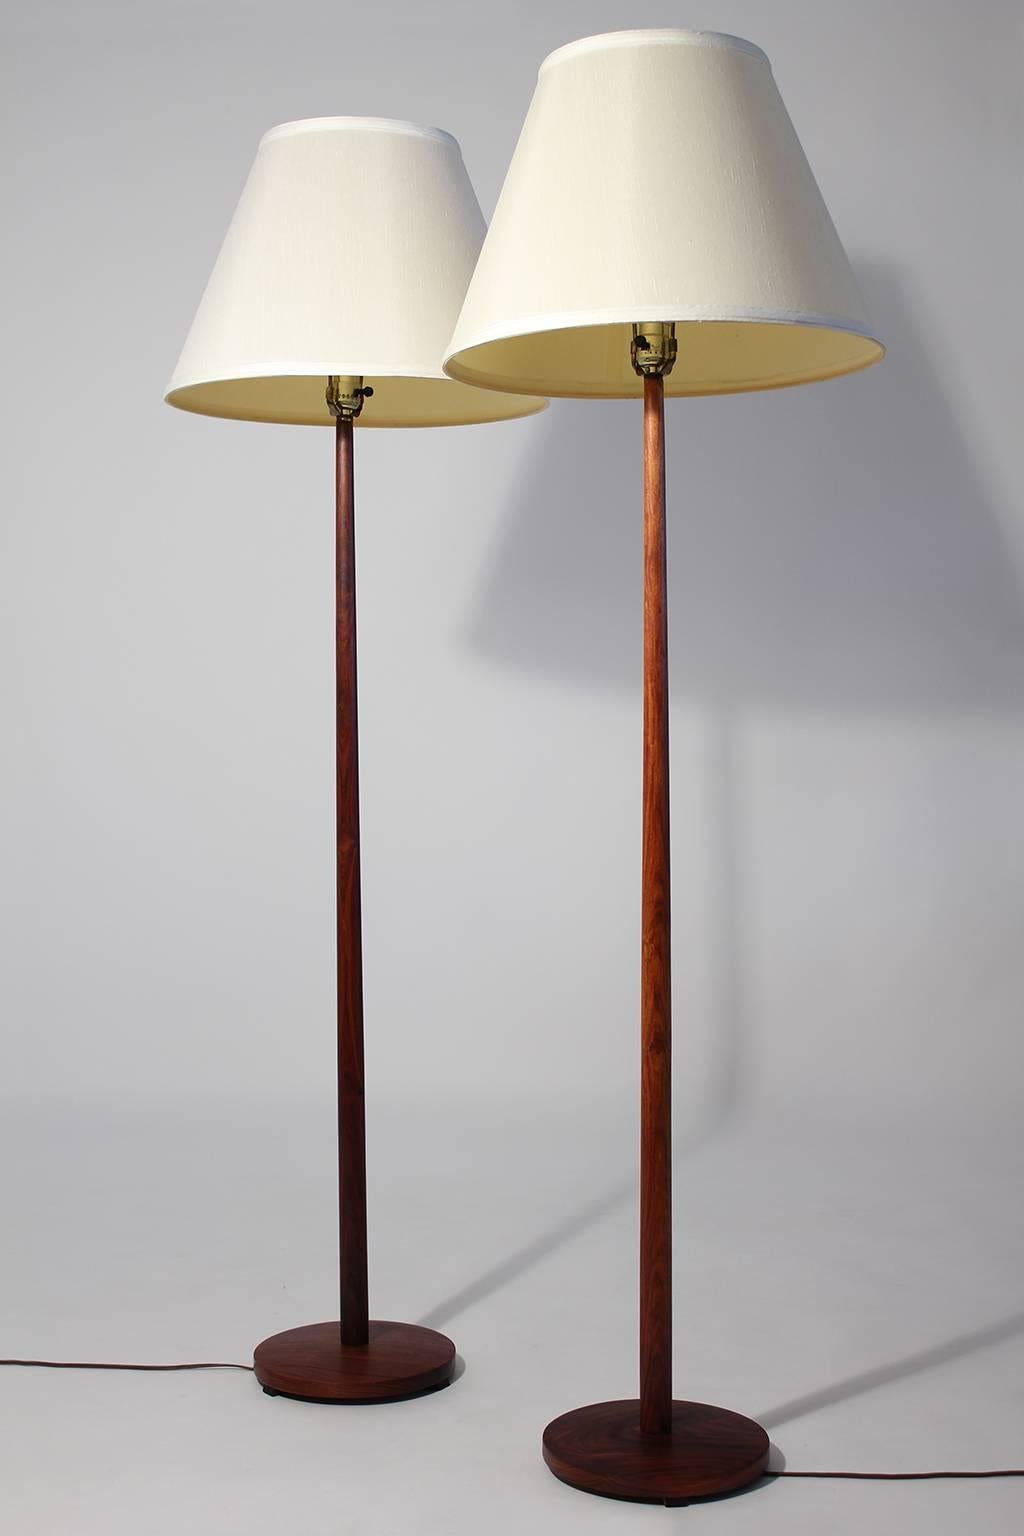 Pair of vintage modernist rosewood floor lamps with weighted bases made in Sweden, circa 1960s. Overall height of 58.5